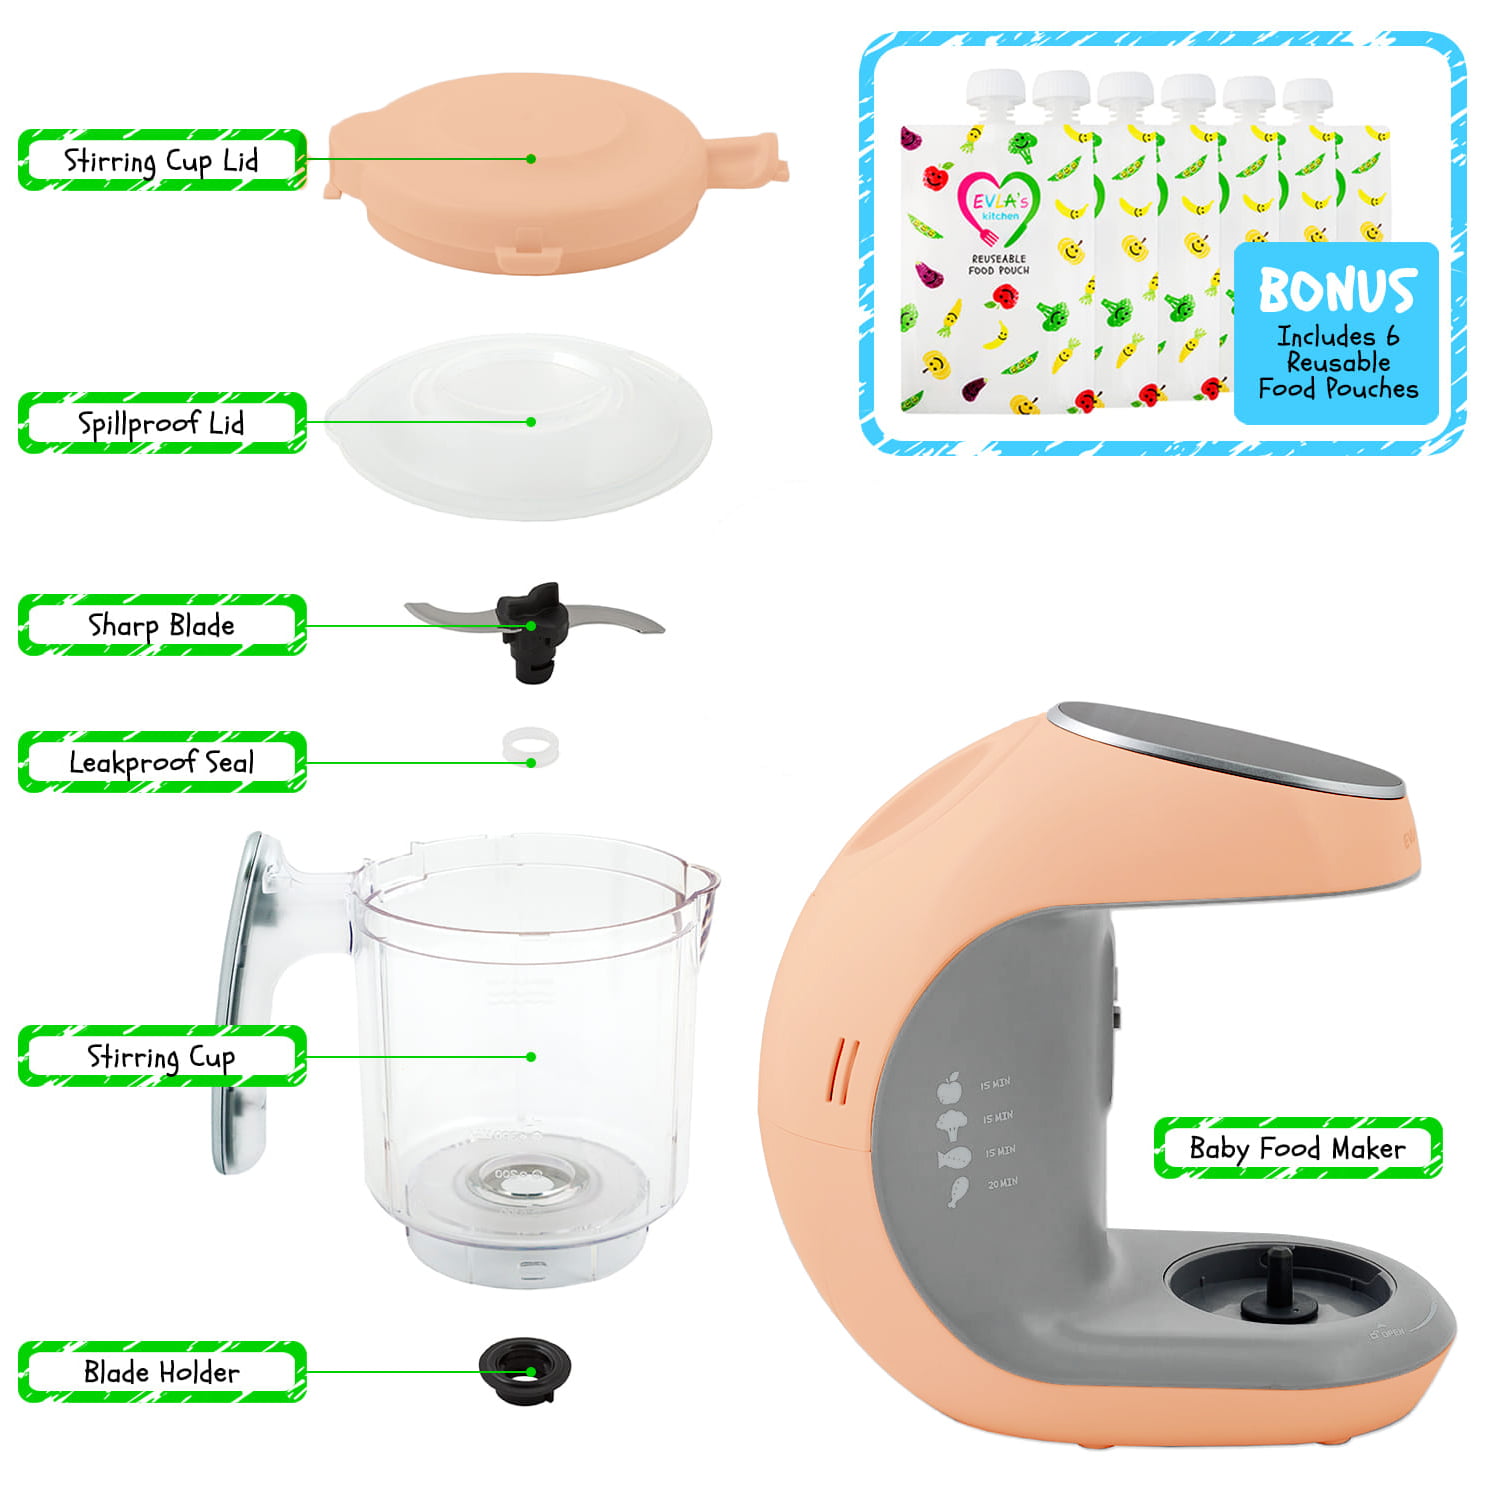  Baby Food Maker, Baby Food Processor Blender Grinder Steamer  Cooks Blends Healthy Homemade Baby Food in Minutes Touch Screen Control…  (BB1048) : Bebés